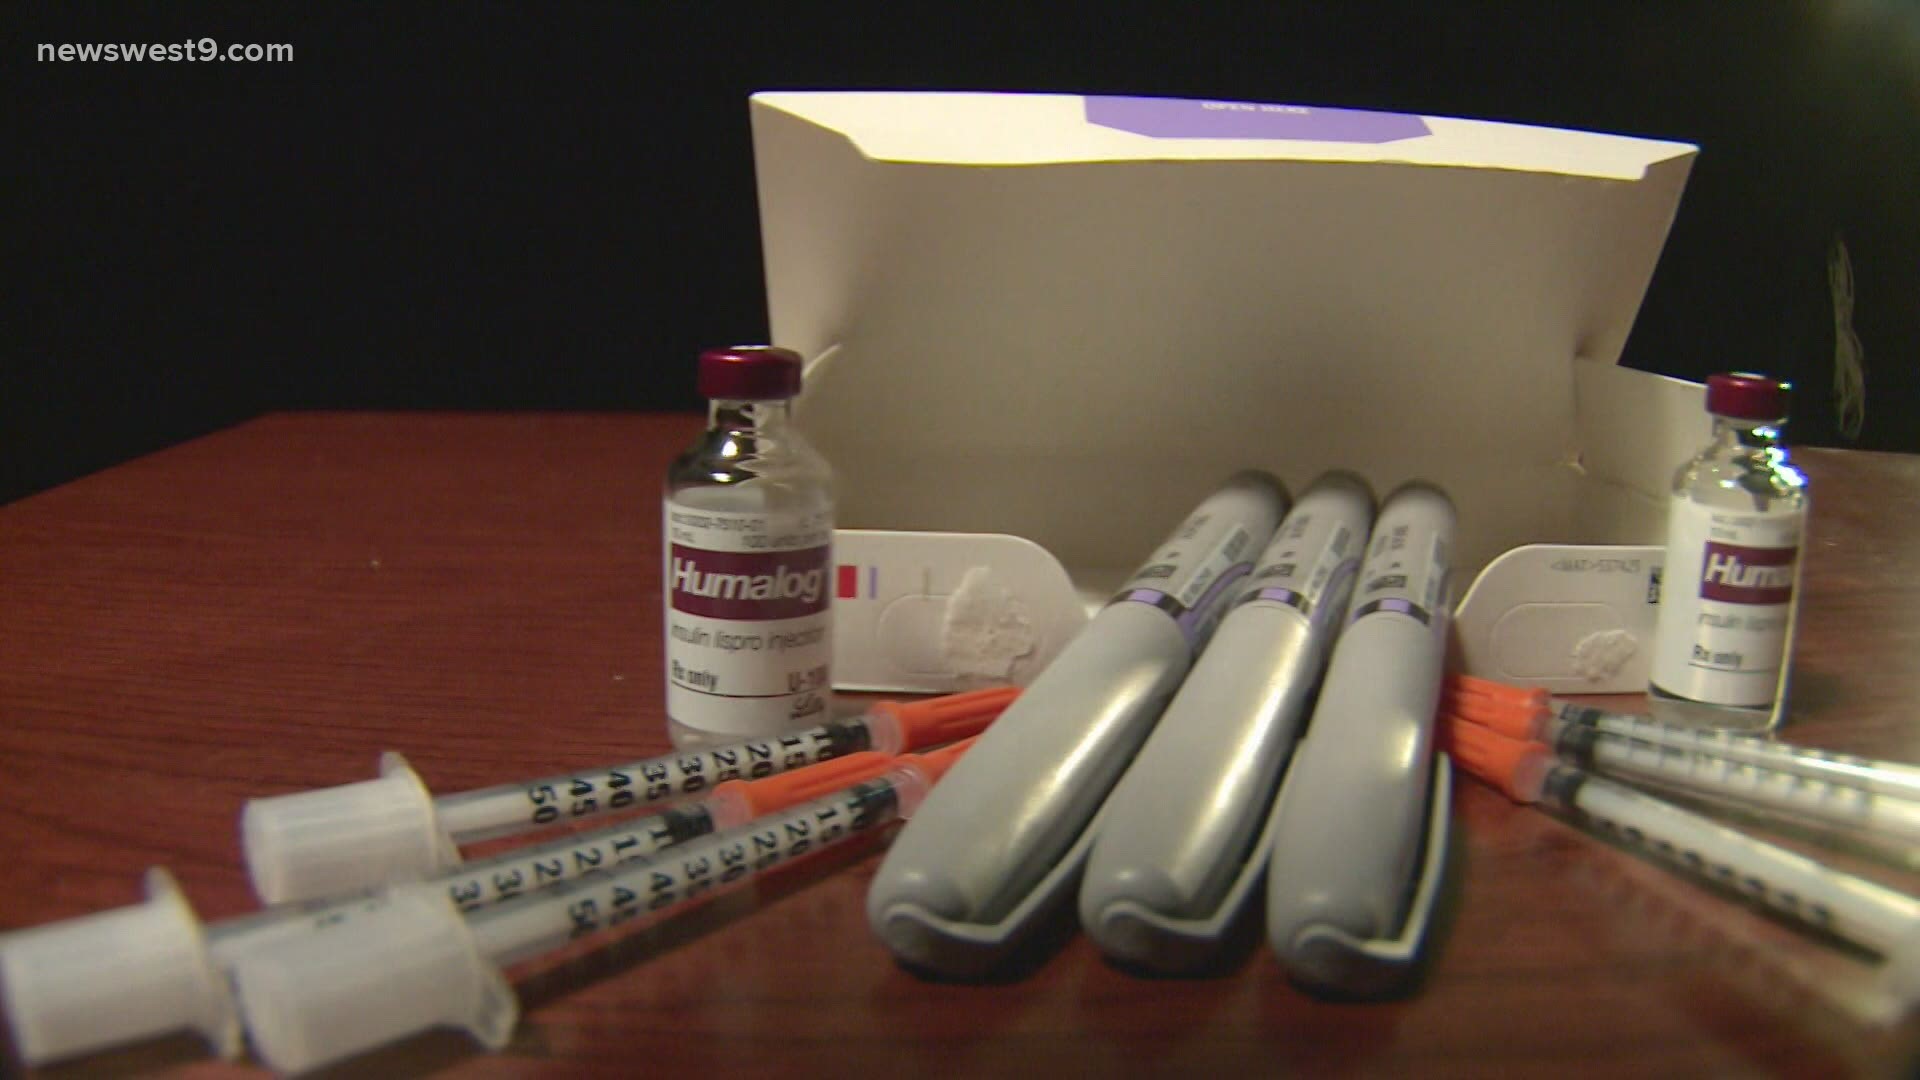 For years the price of insulin has been high for diabetics. A new bill could set a cap on the out of pocket cost that Texans pay for the medicine.